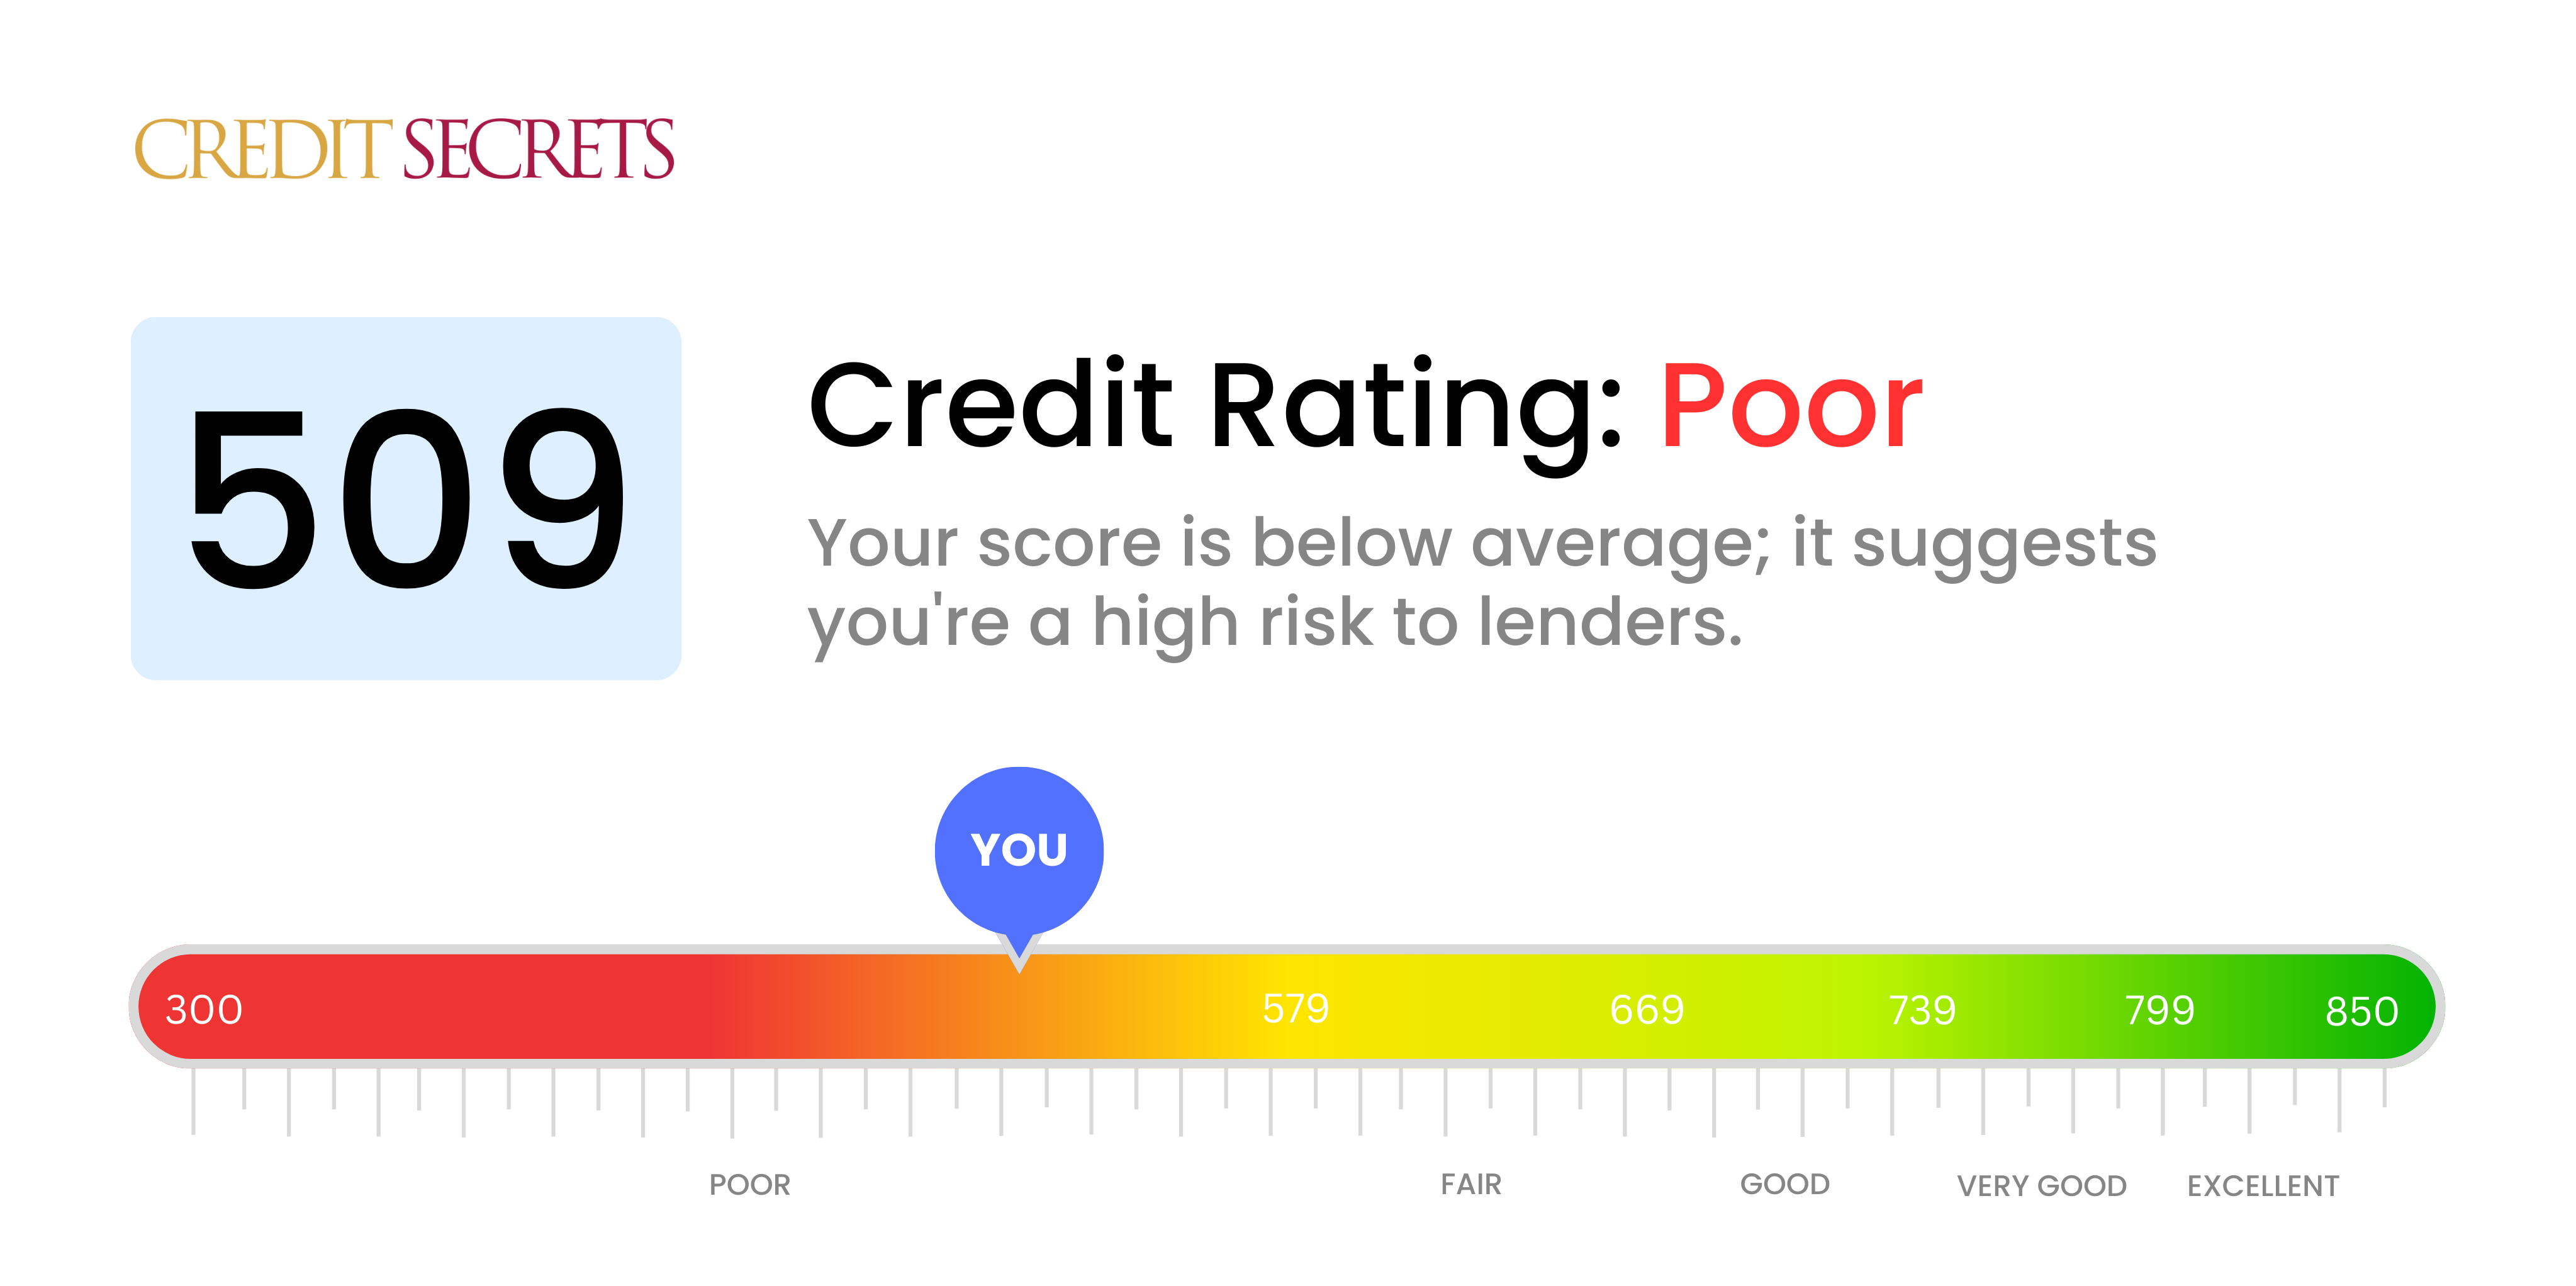 Is 509 a good credit score?